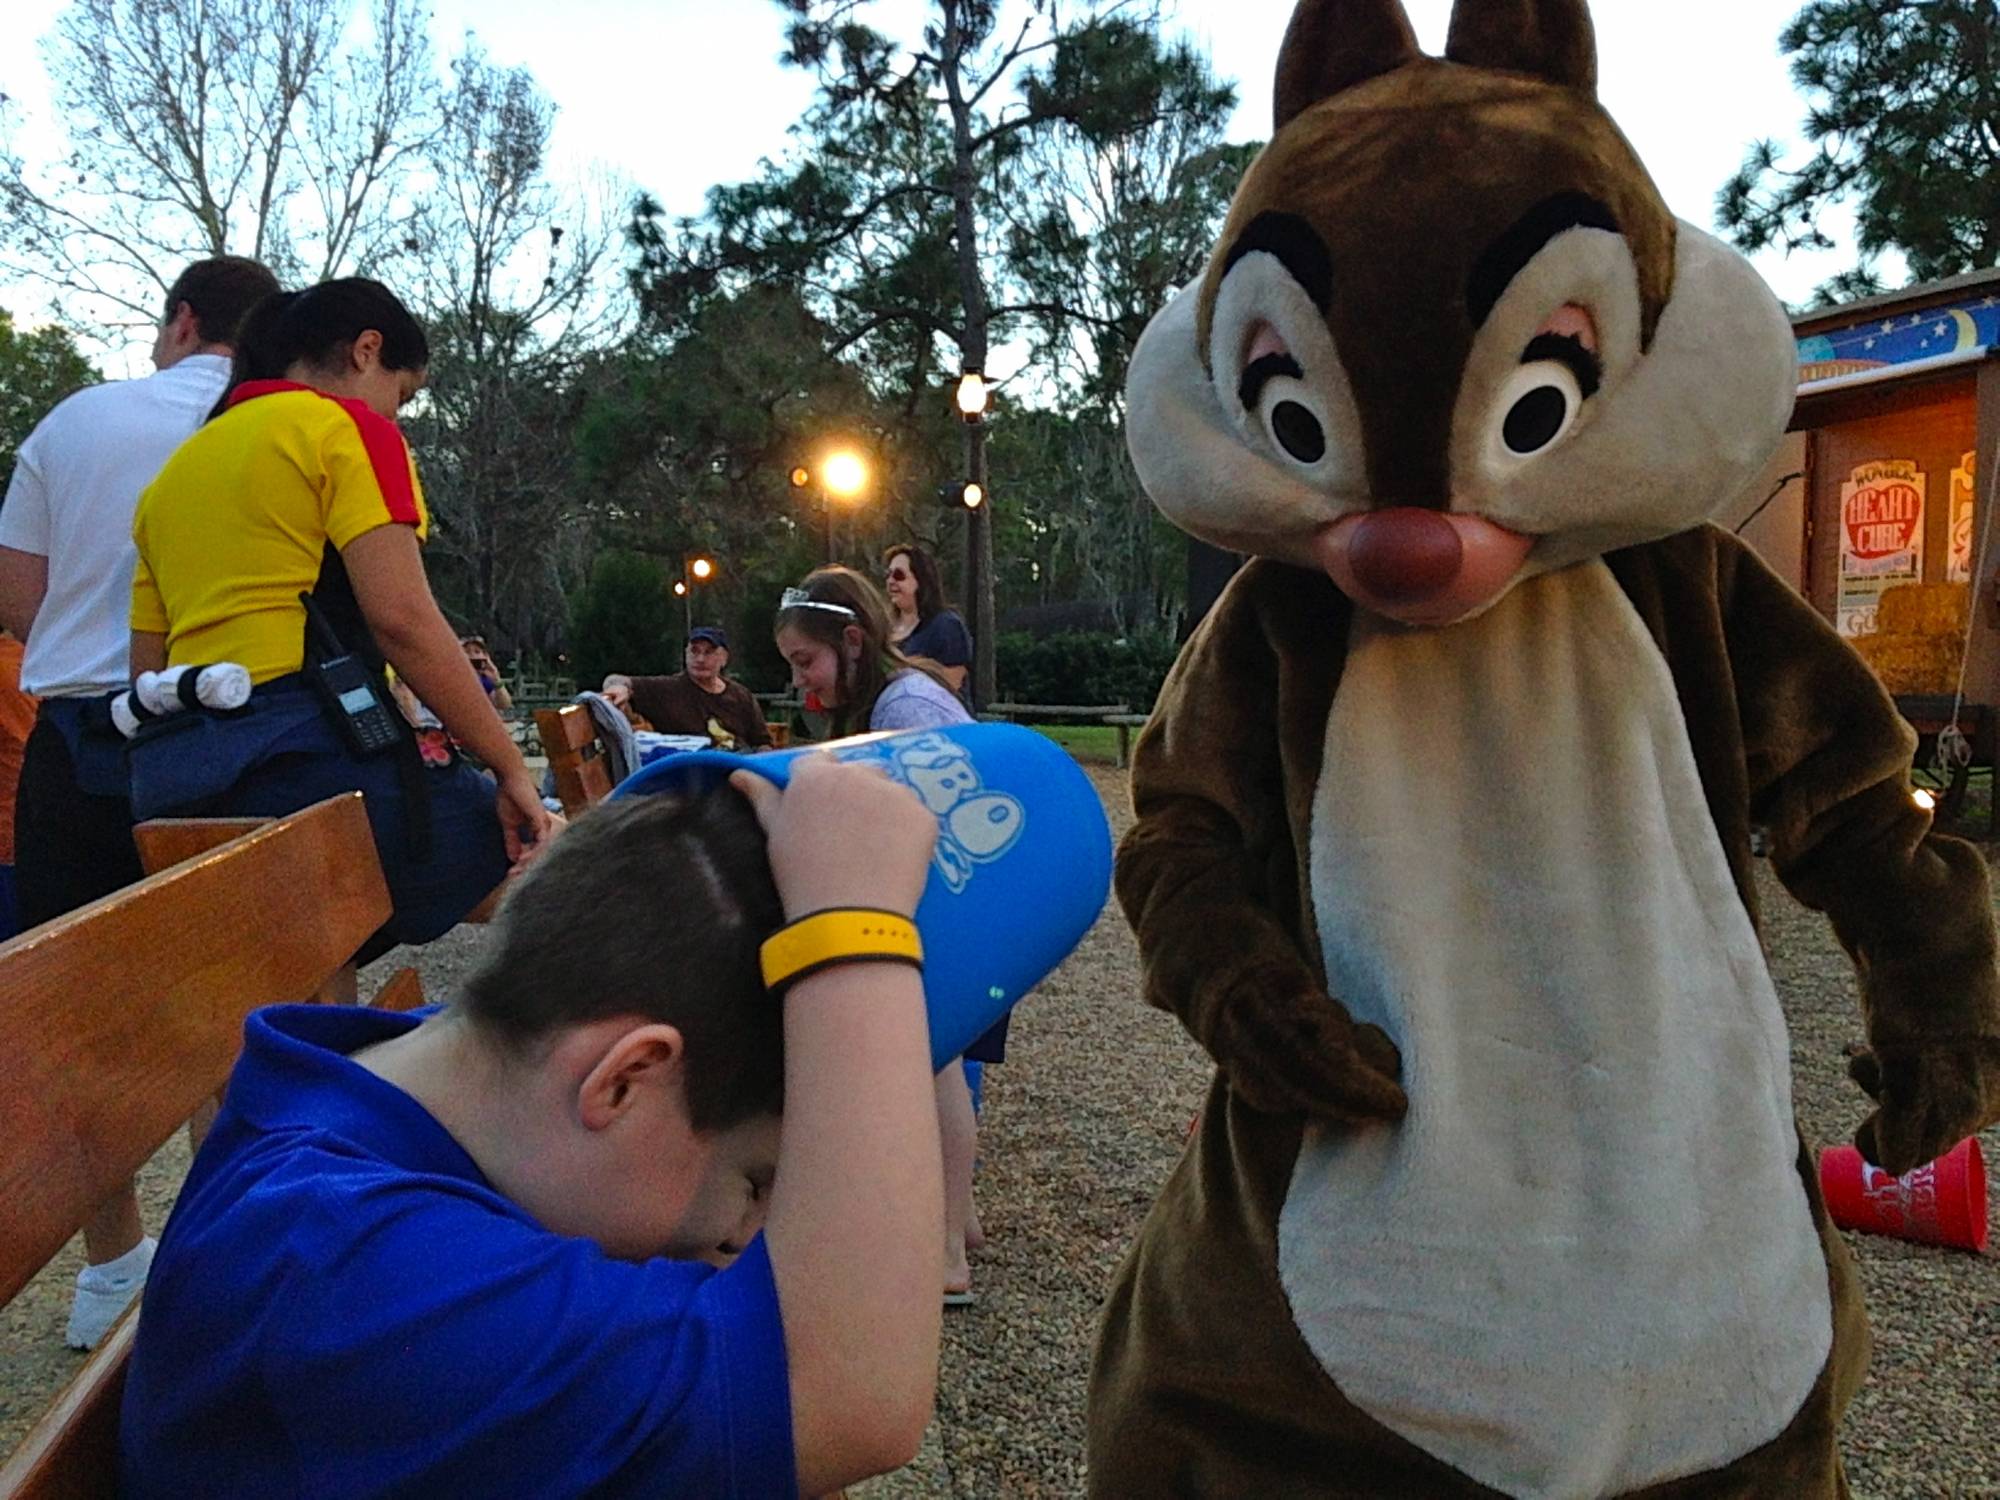 Chip 'n Dale's Campfire Sing-a-long at Fort Wilderness